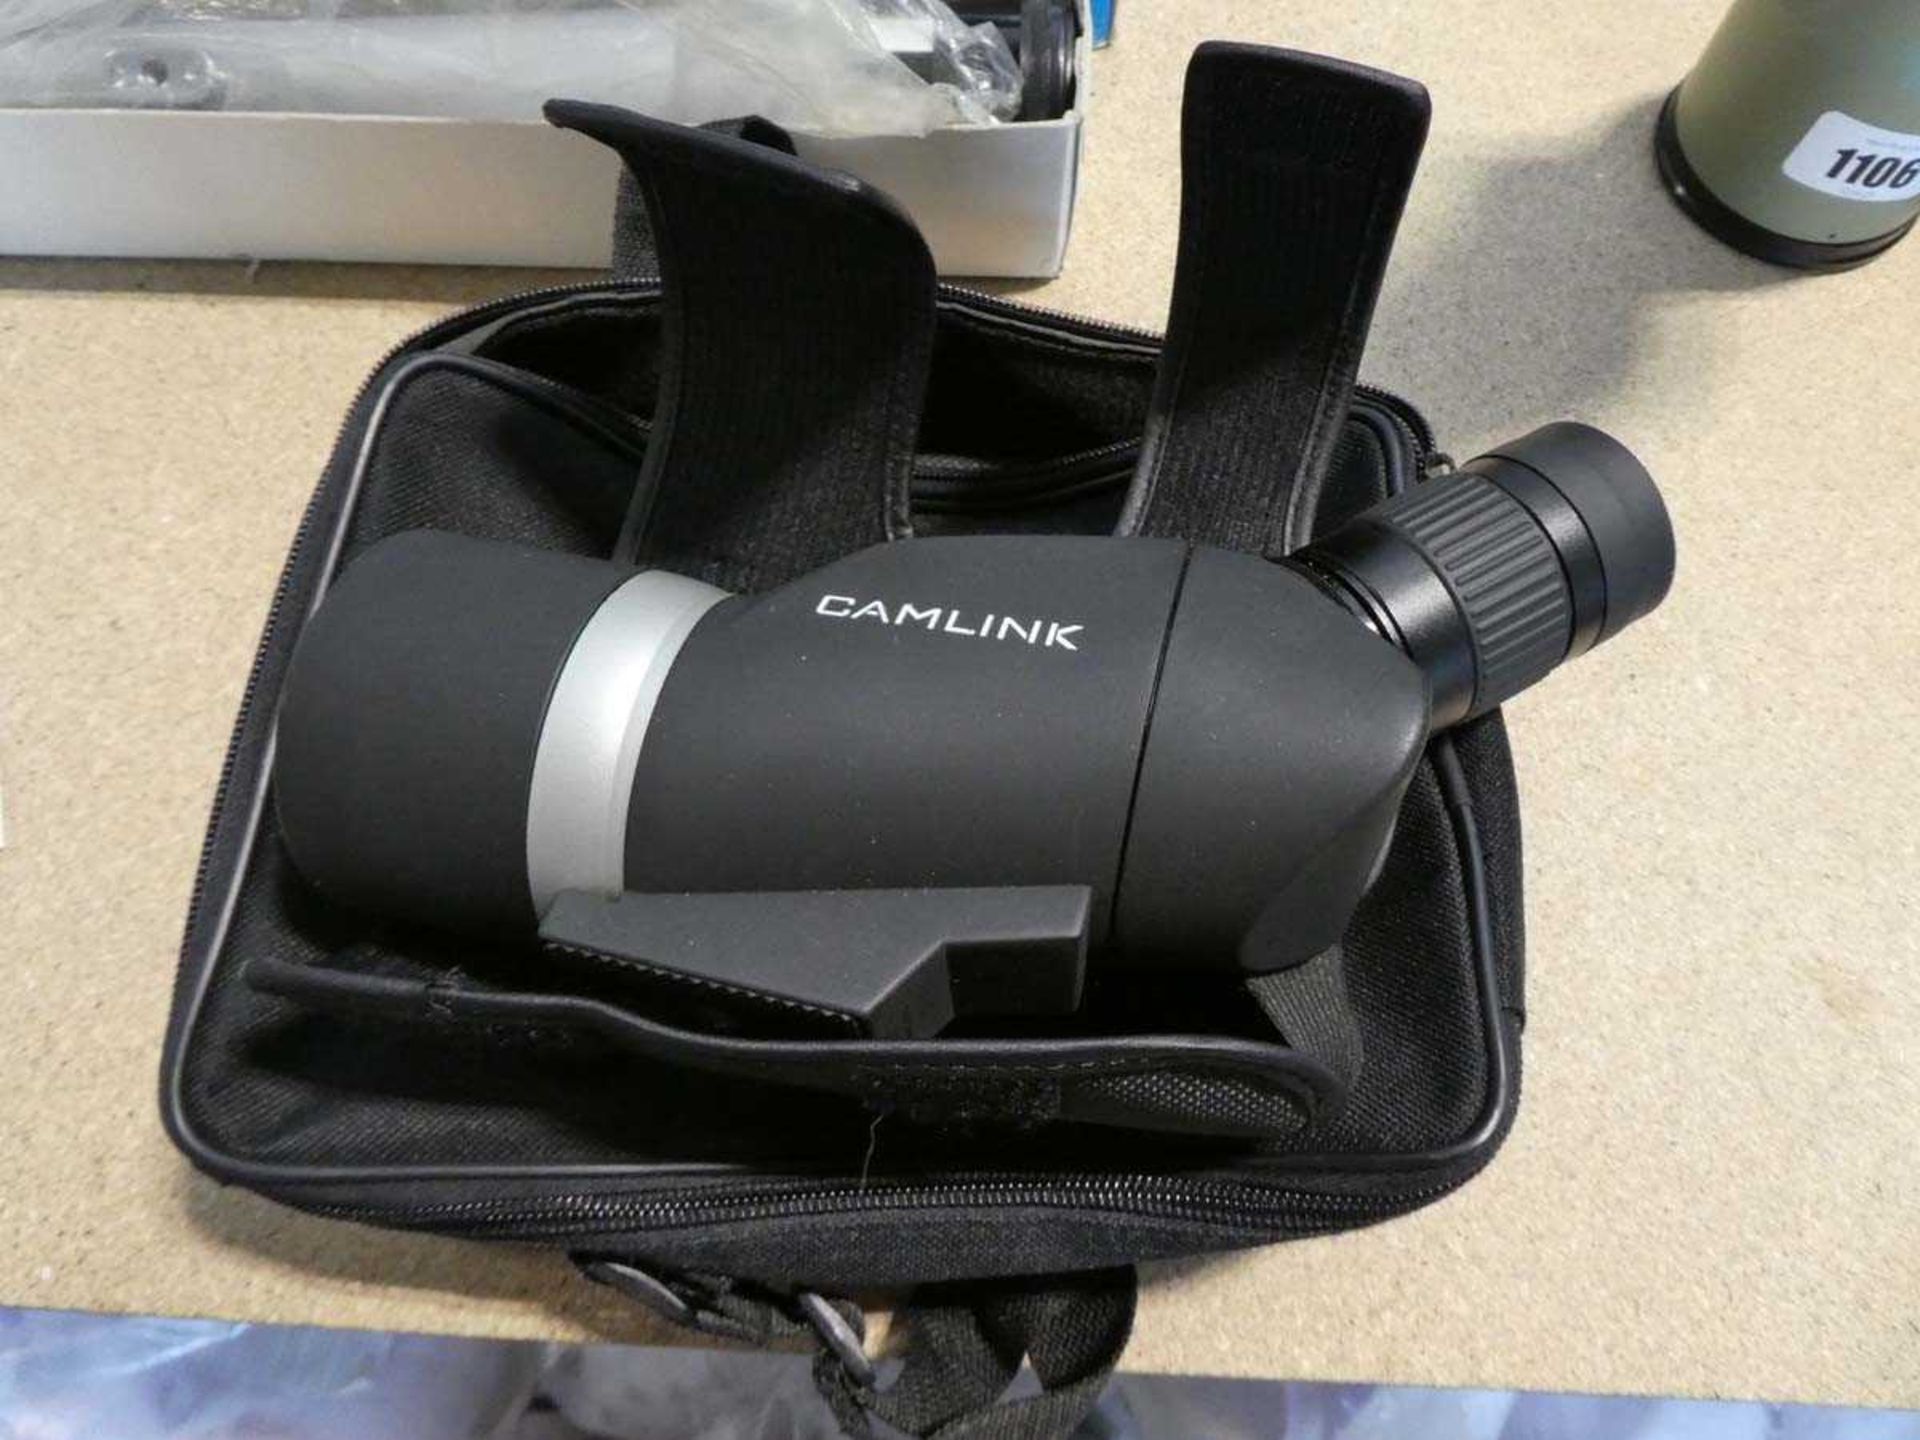 Camlink 45mm scope with soft detachable grip and soft carry case